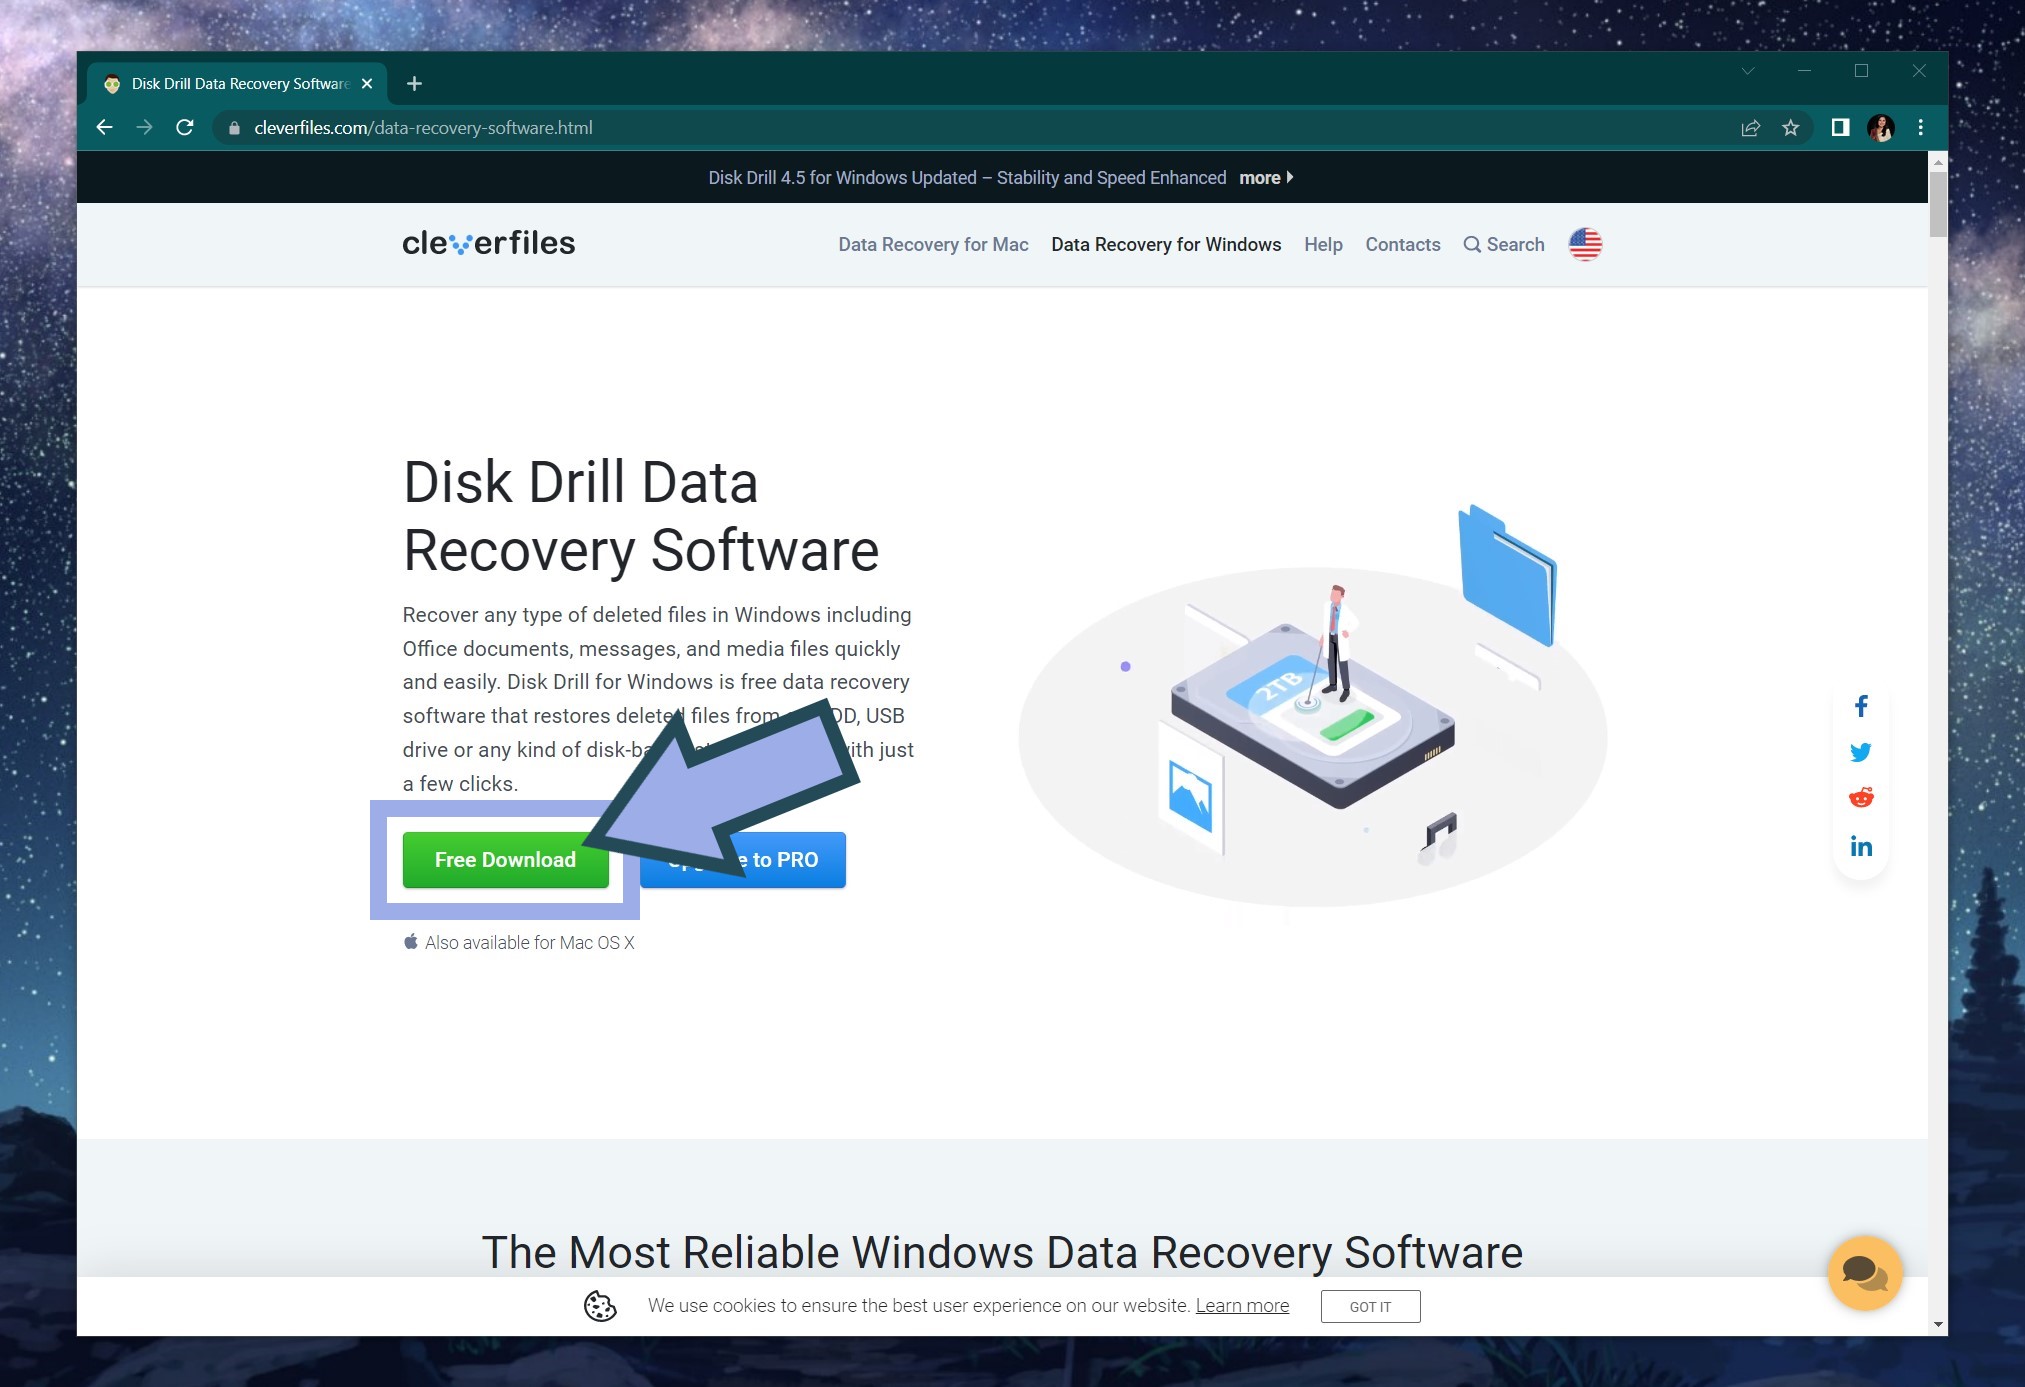 Disk Drill recovery software download page